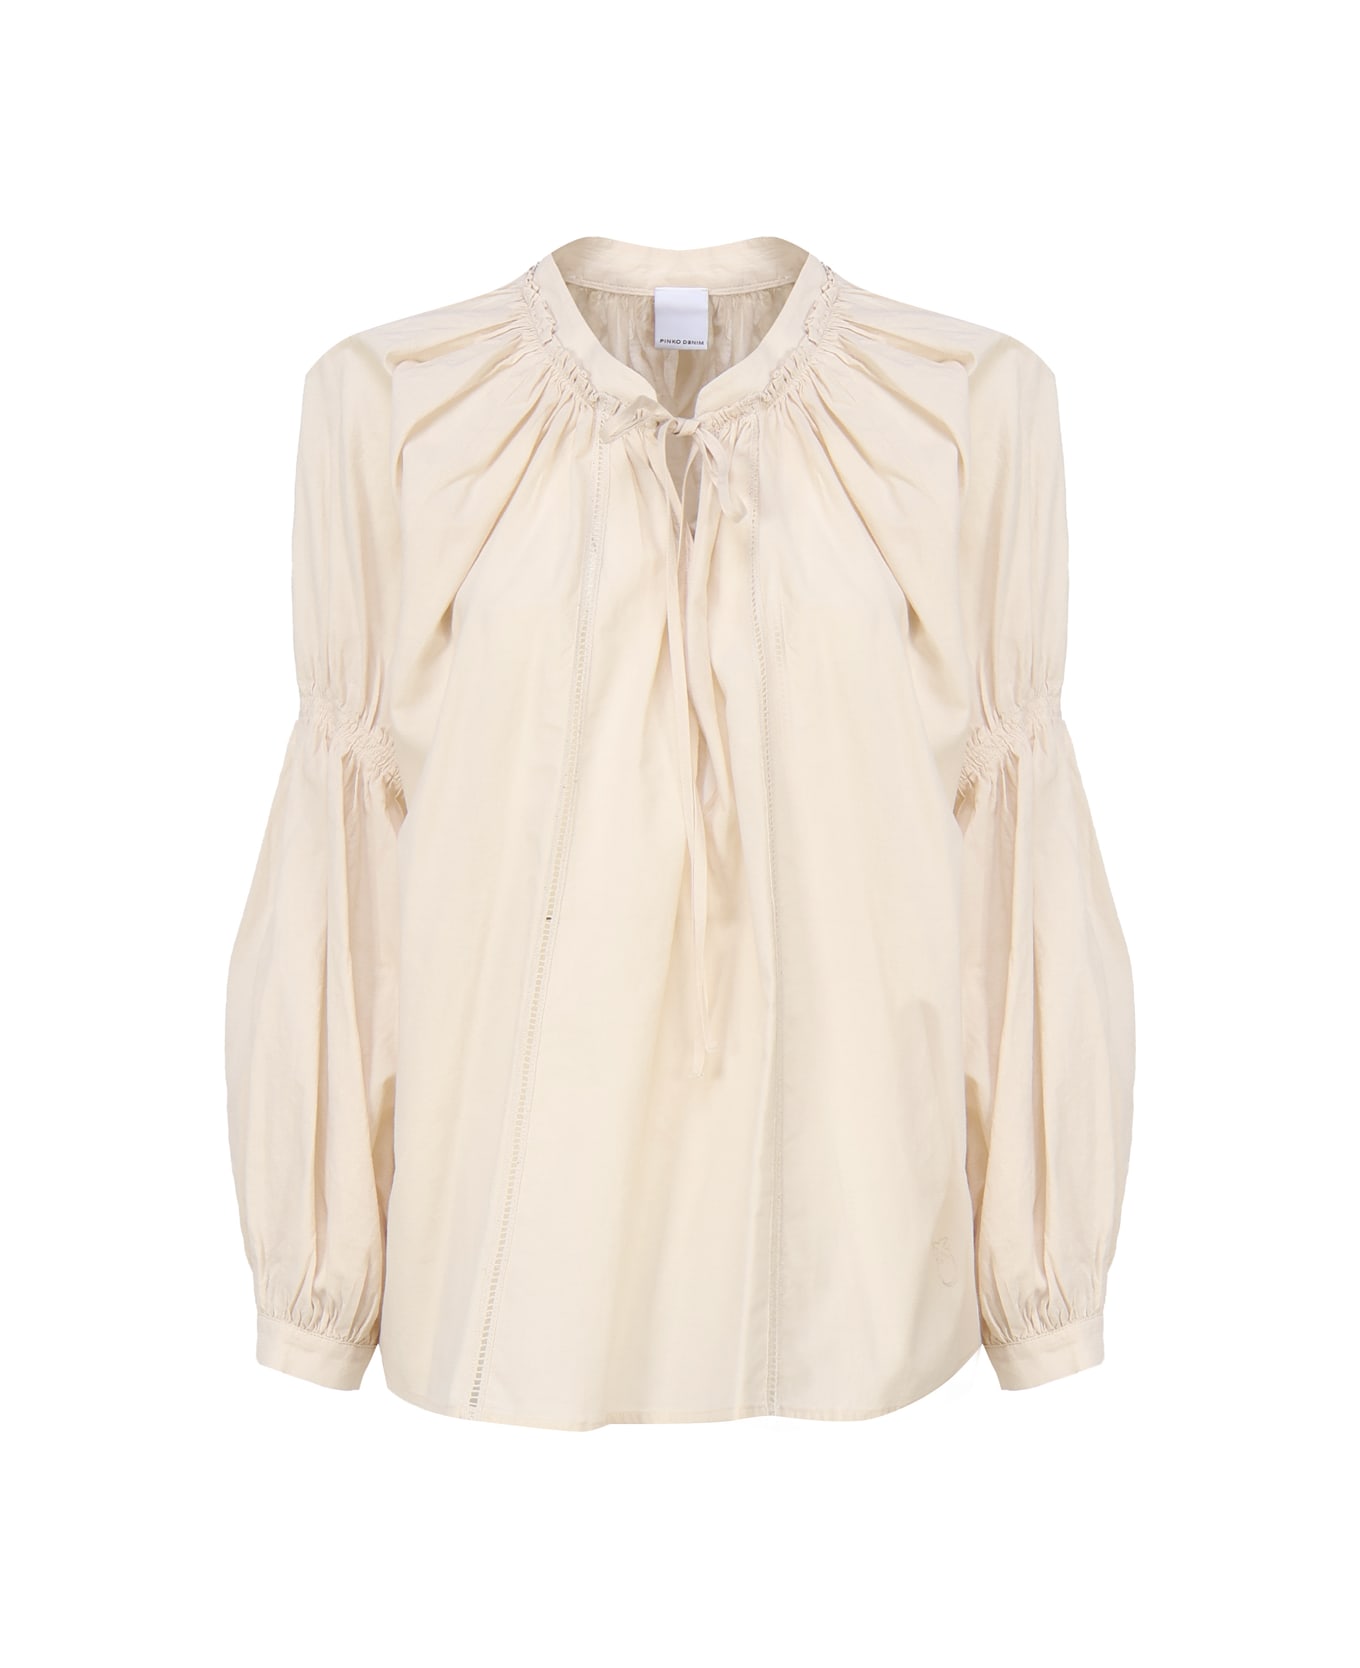 Pinko Muslin Blouse With Perforated Embroidery - Ivory